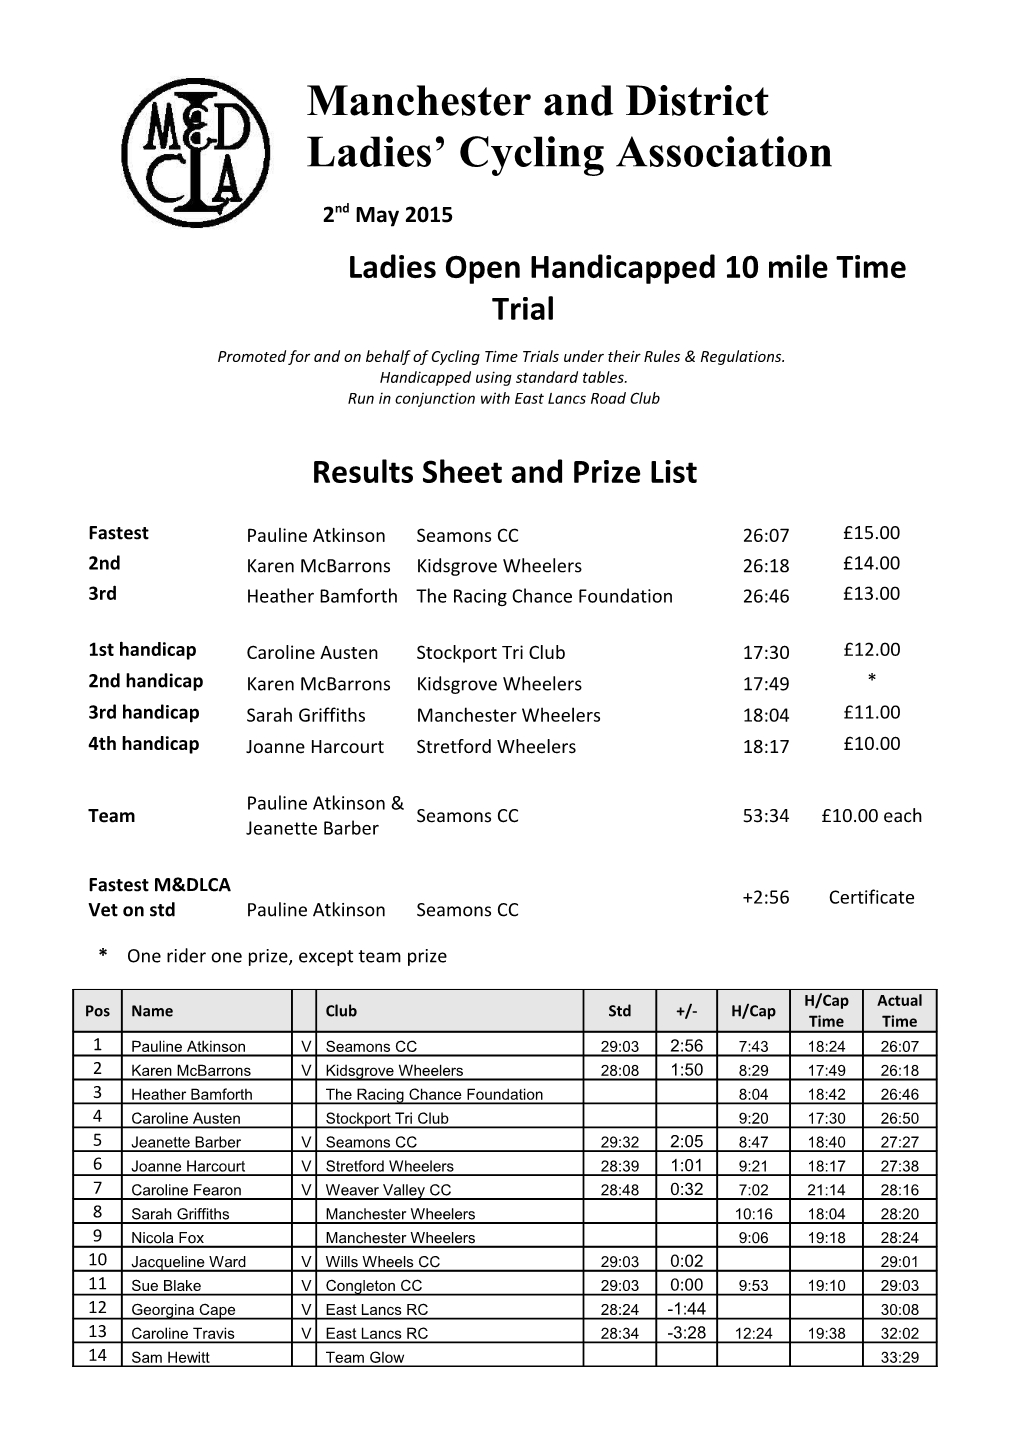 Ladies Open Handicapped 10 Mile Time Trial